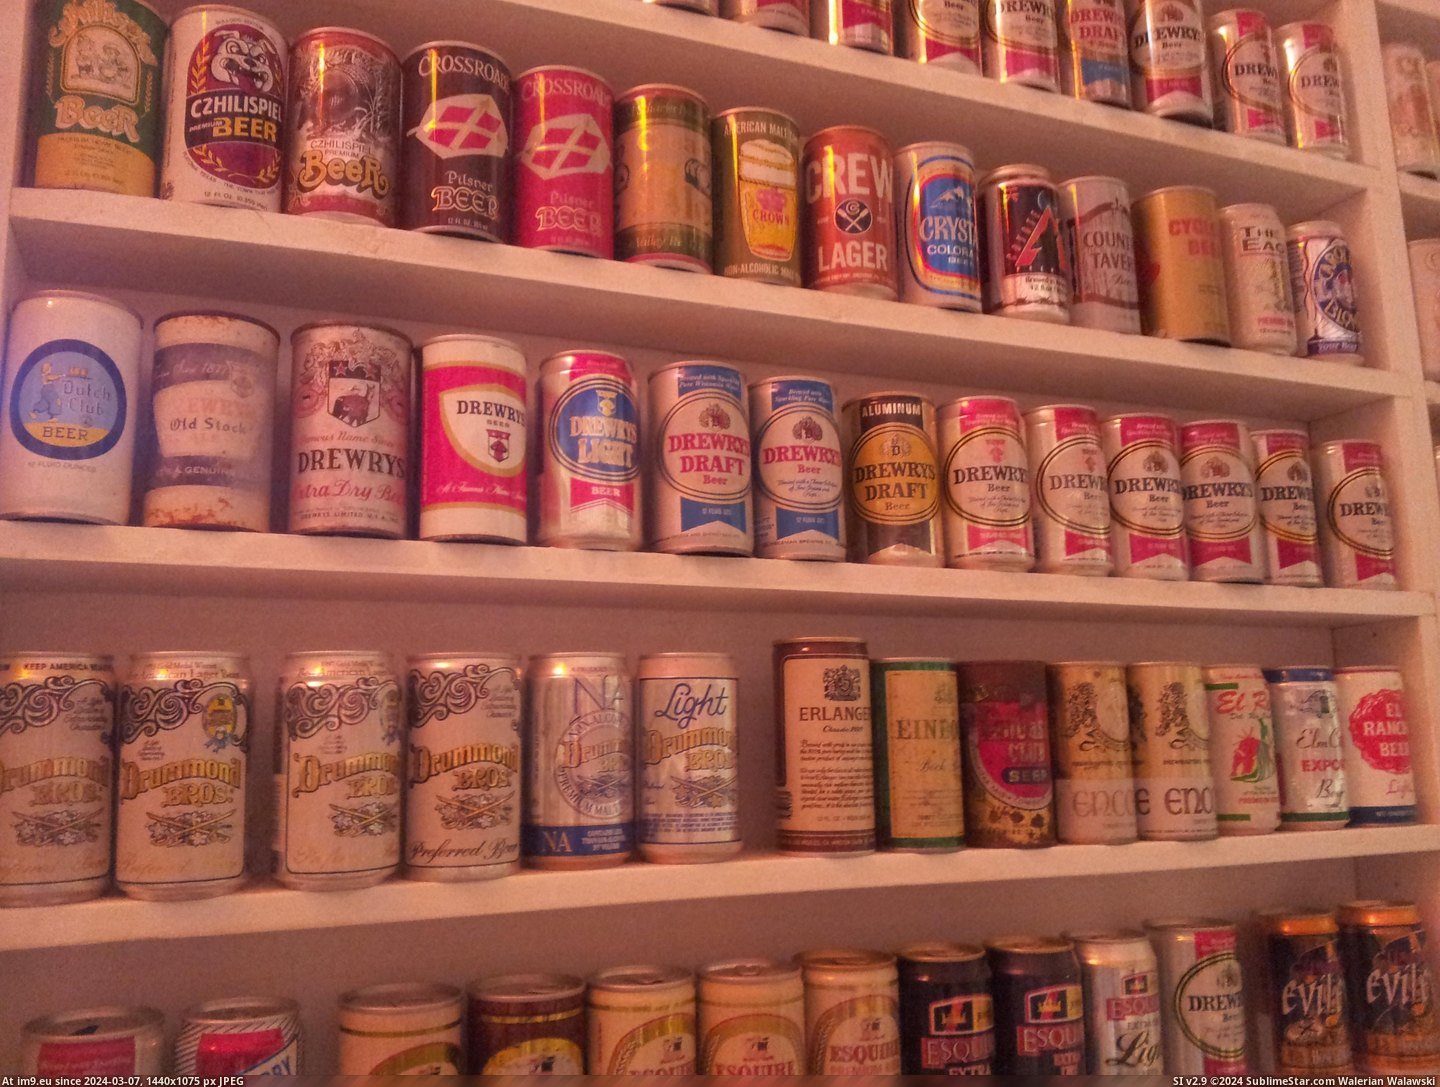 #Collection #For #Years #Grandpa #Cans #Collecting #Share #Thought #Beer [Pics] My grandpa has been collecting beer cans for over thirty years, so I thought I would go ahead and share his collection wi Pic. (Изображение из альбом My r/PICS favs))